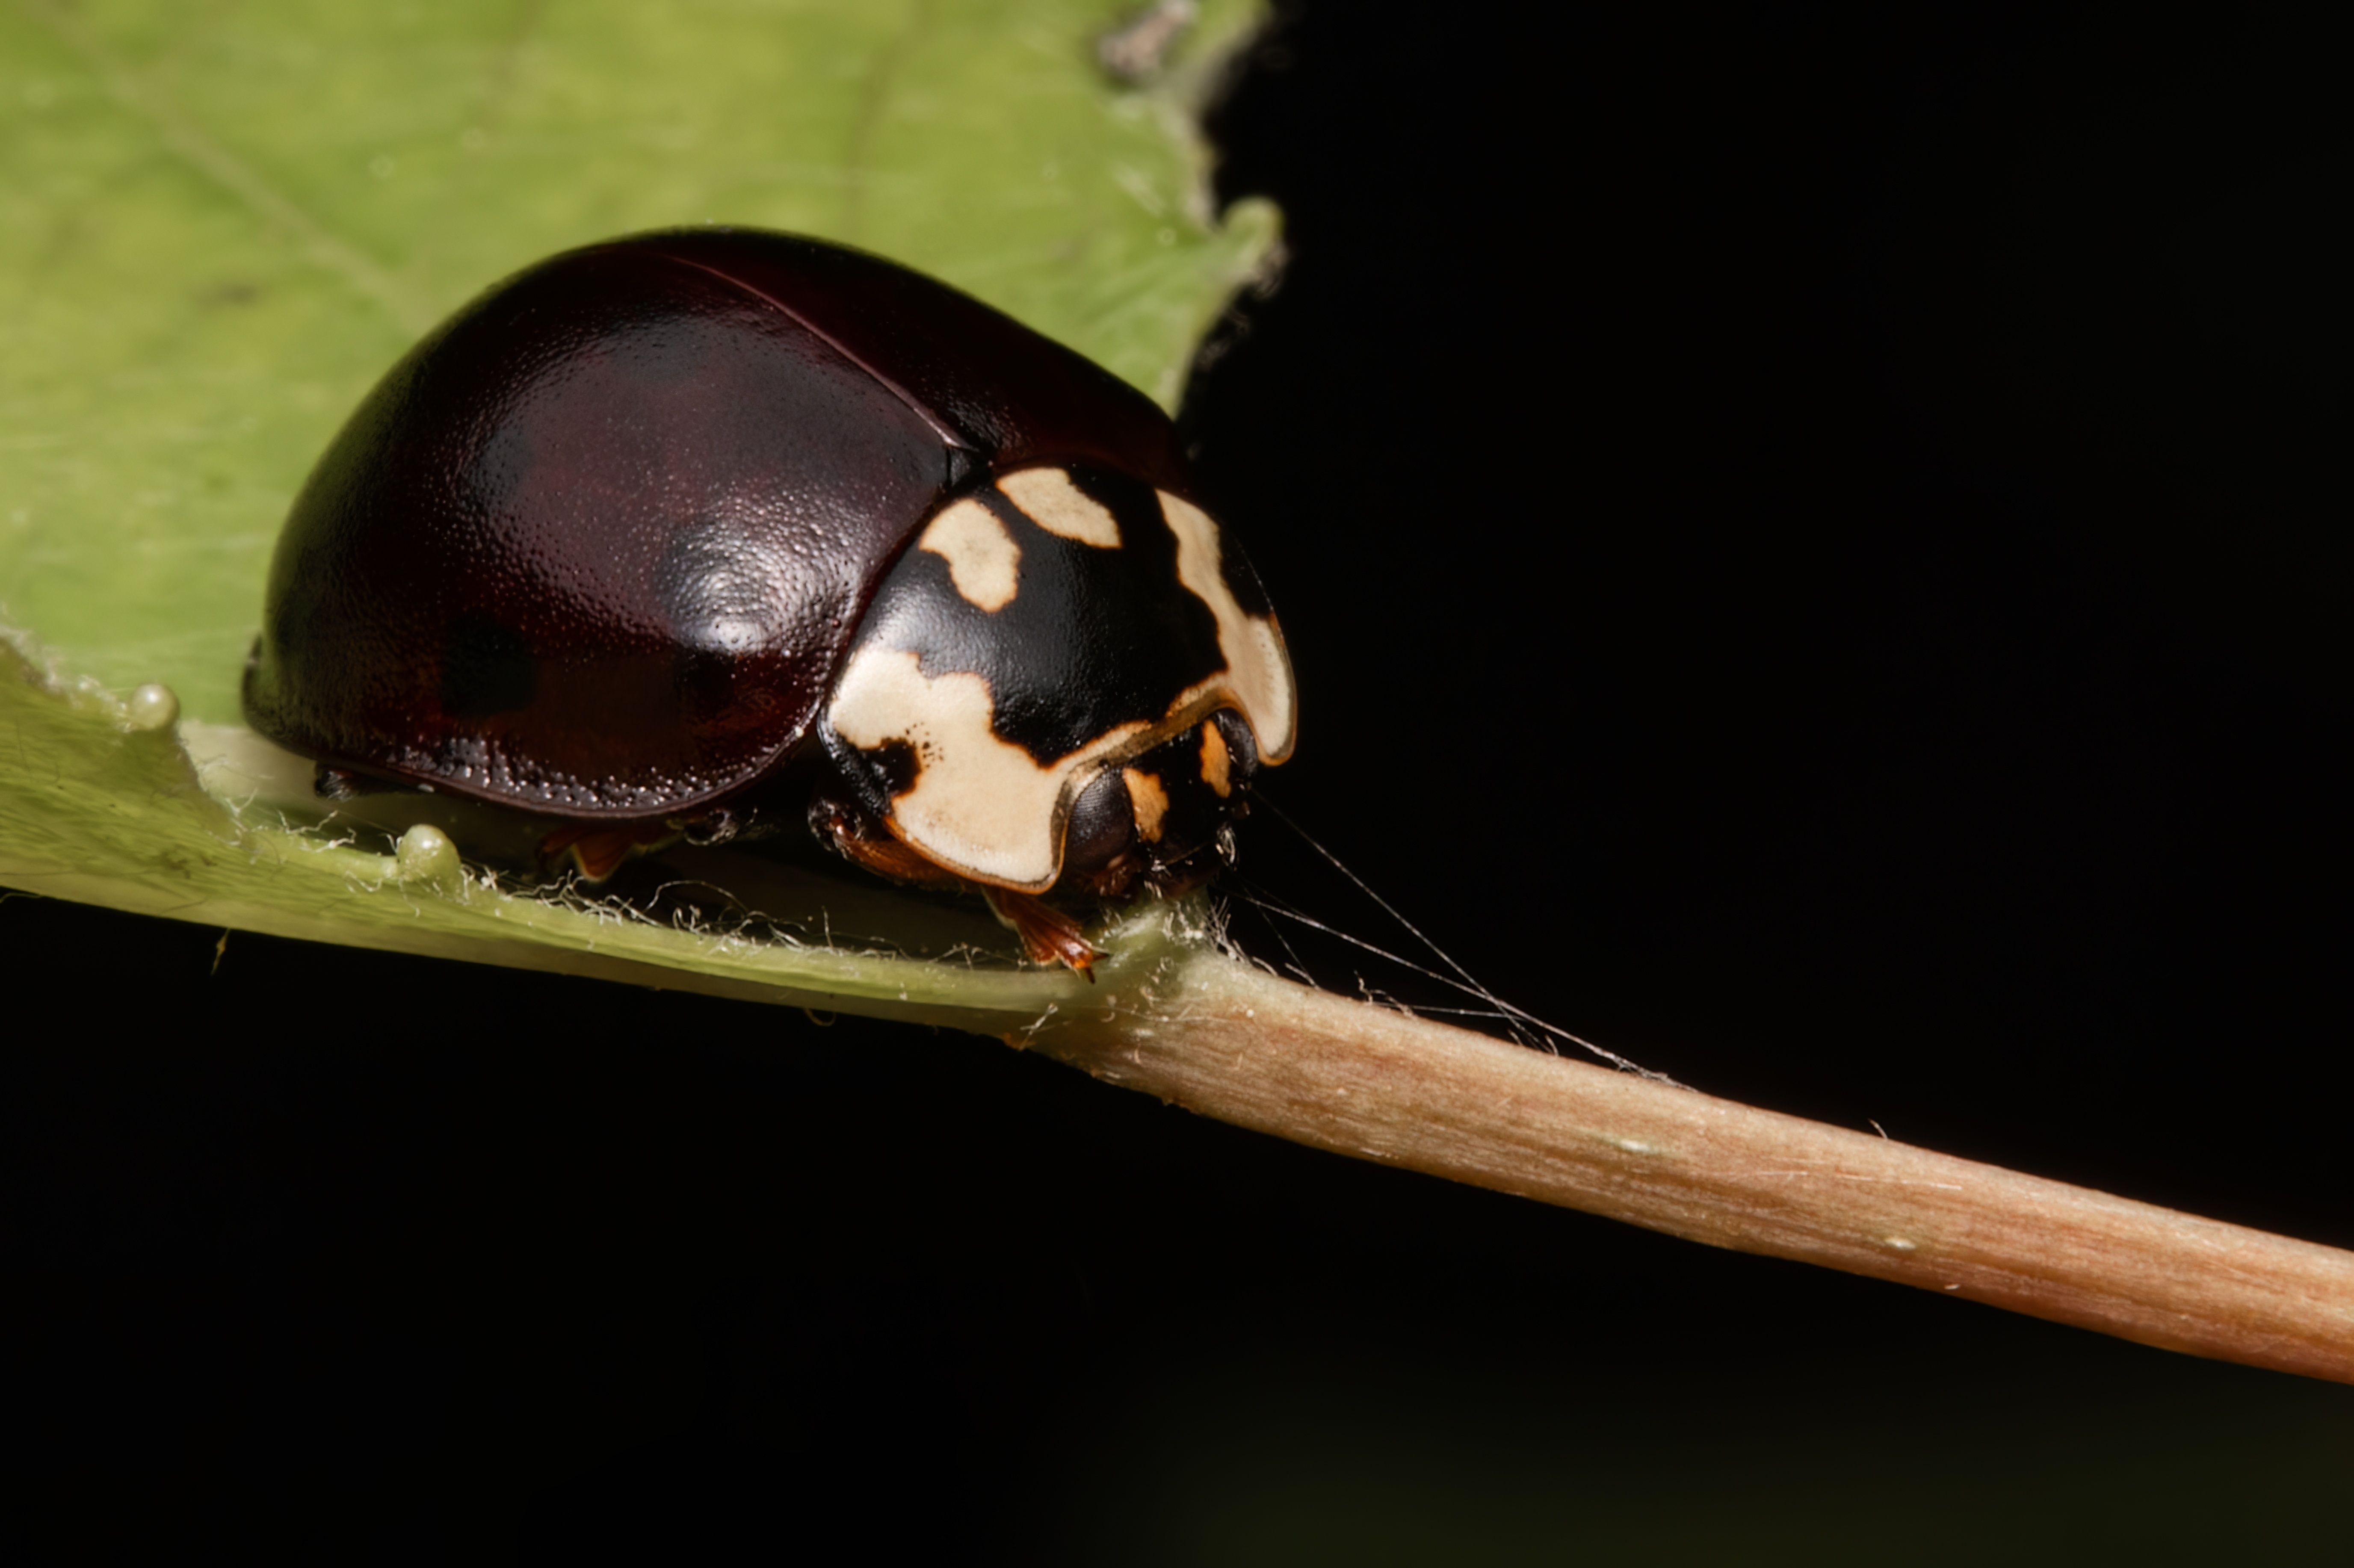 coleoptera, insect, insectlovers, insectmacro, insectphoto, nature, macrophoto, macrolovers,, Stephane